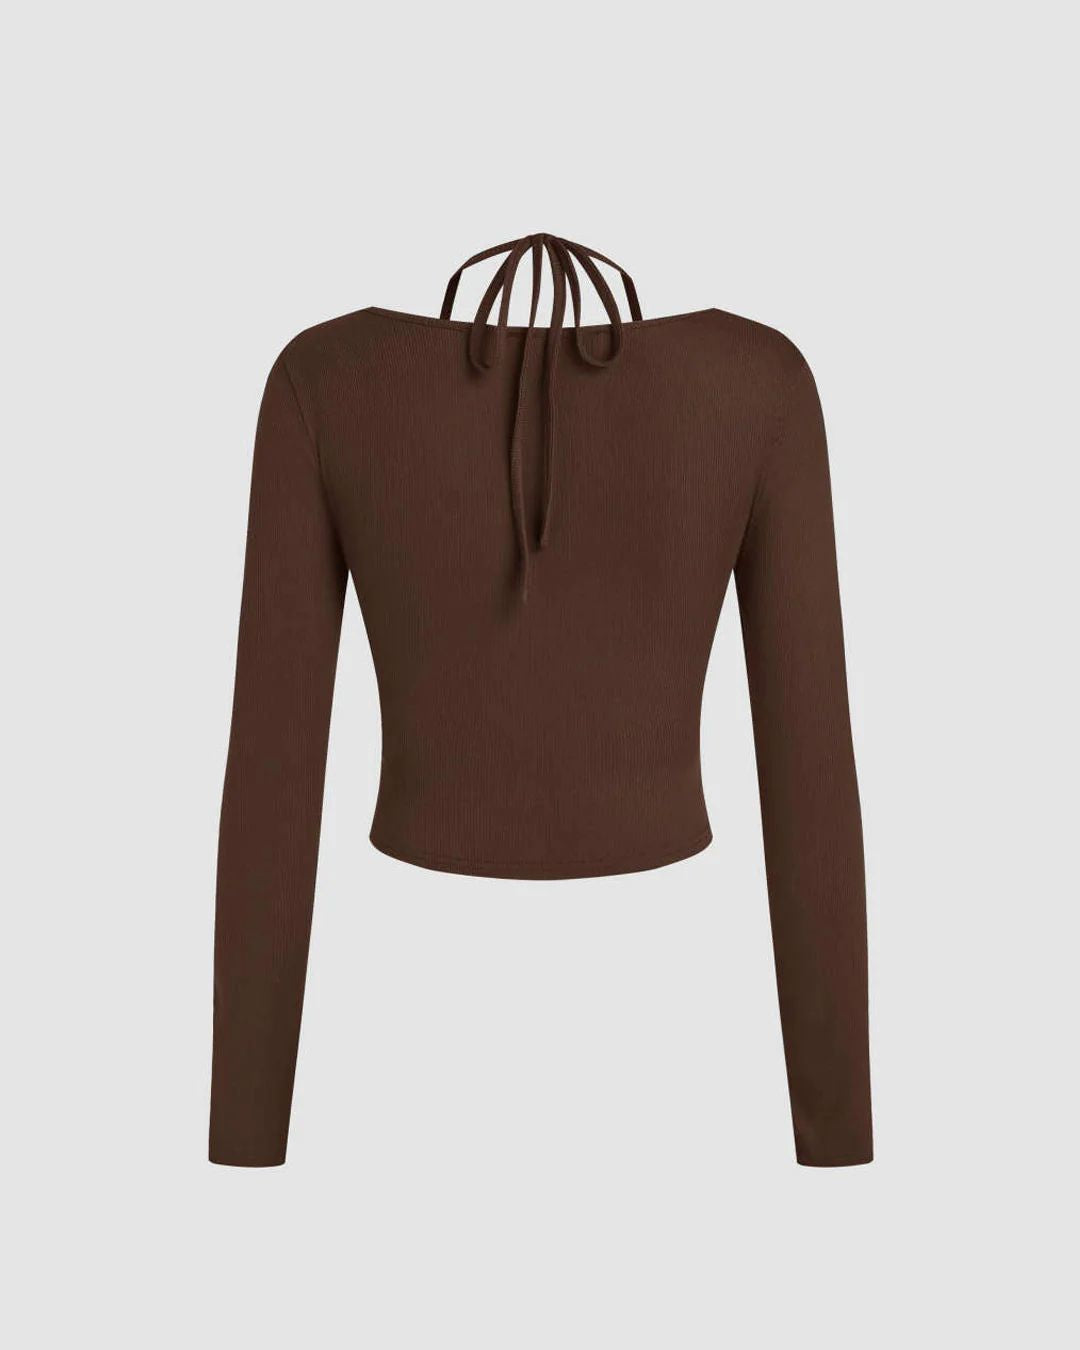 RIBBED HALTER NECK TOP,brown, casual, fitted, halter neck, knitted, long sleeves, regular, ribbed, skinny fit, solid, streetwear, stretchable, summer, tops, topwear,ribbed-halter-neck-top,Color- Brown
Fabric- Ribbed
Fit- Skinny Fit 
Length- Regular
Neck- Halter Neck
Sleeves- Long Sleeves
Print- Solid
Details- Overlap front panels